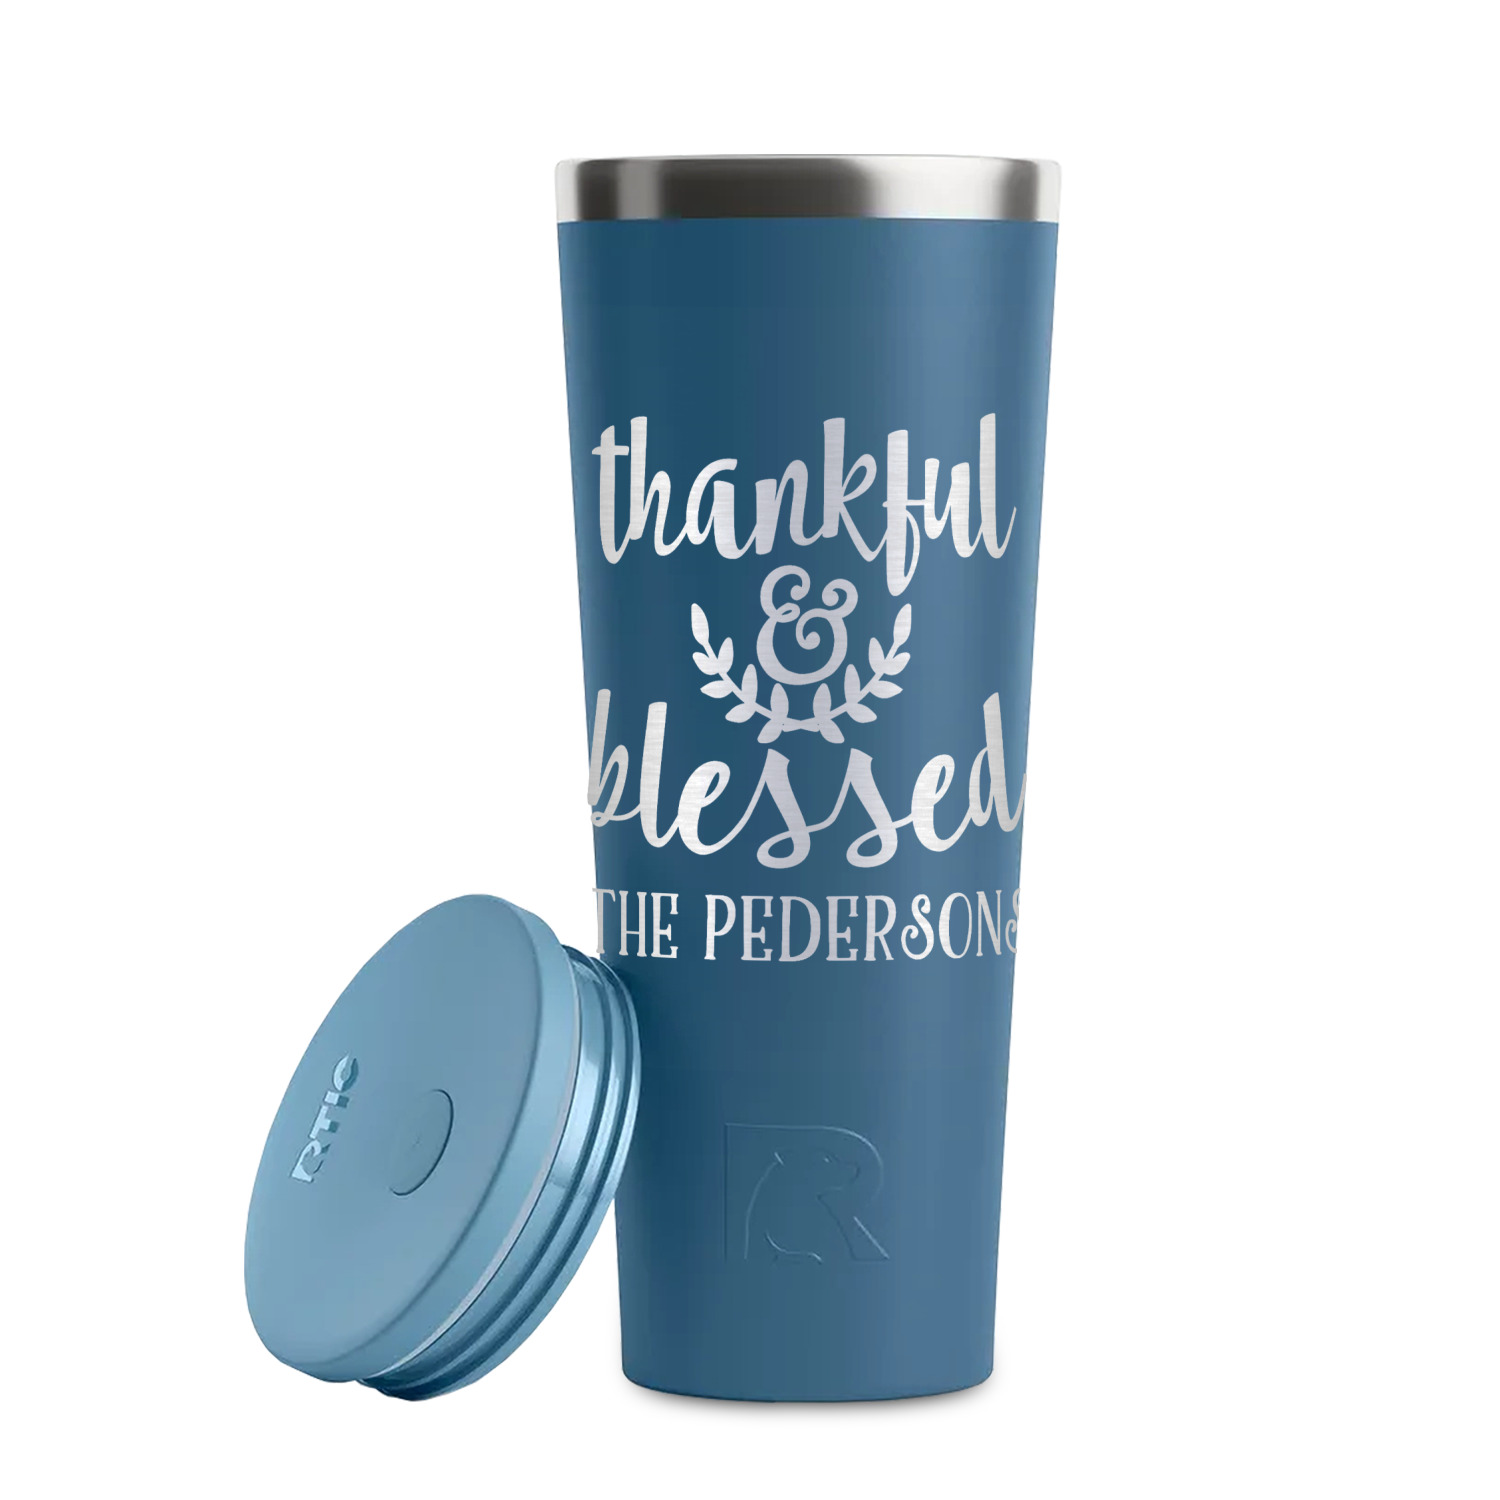 https://www.youcustomizeit.com/common/MAKE/1038351/Thankful-Blessed-Steel-Blue-RTIC-Everyday-Tumbler-28-oz-Lid-Off.jpg?lm=1698260788